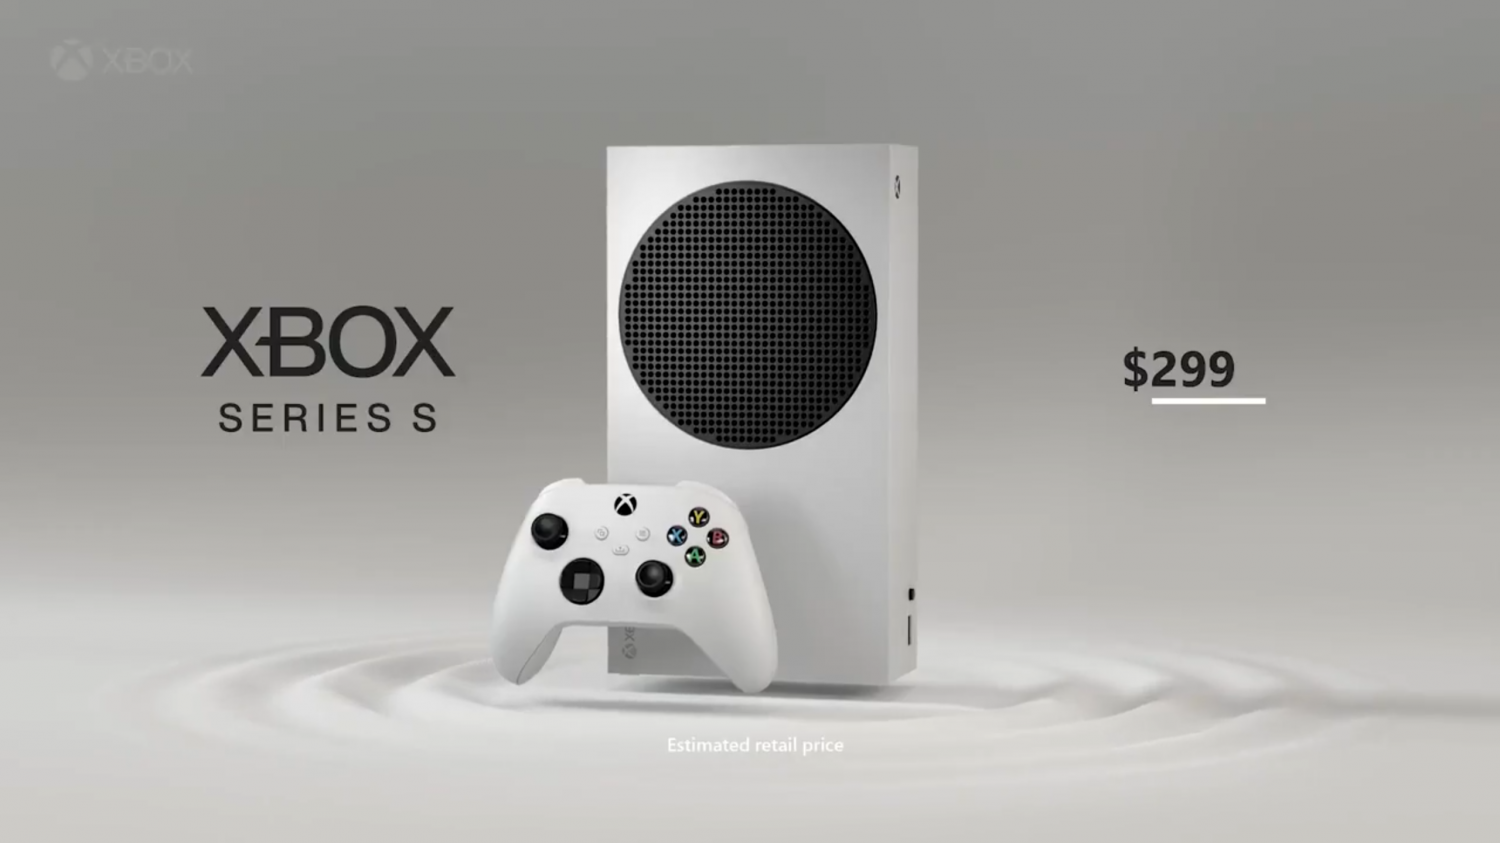 Xbox Series X Slim: release date, price, rumors and features